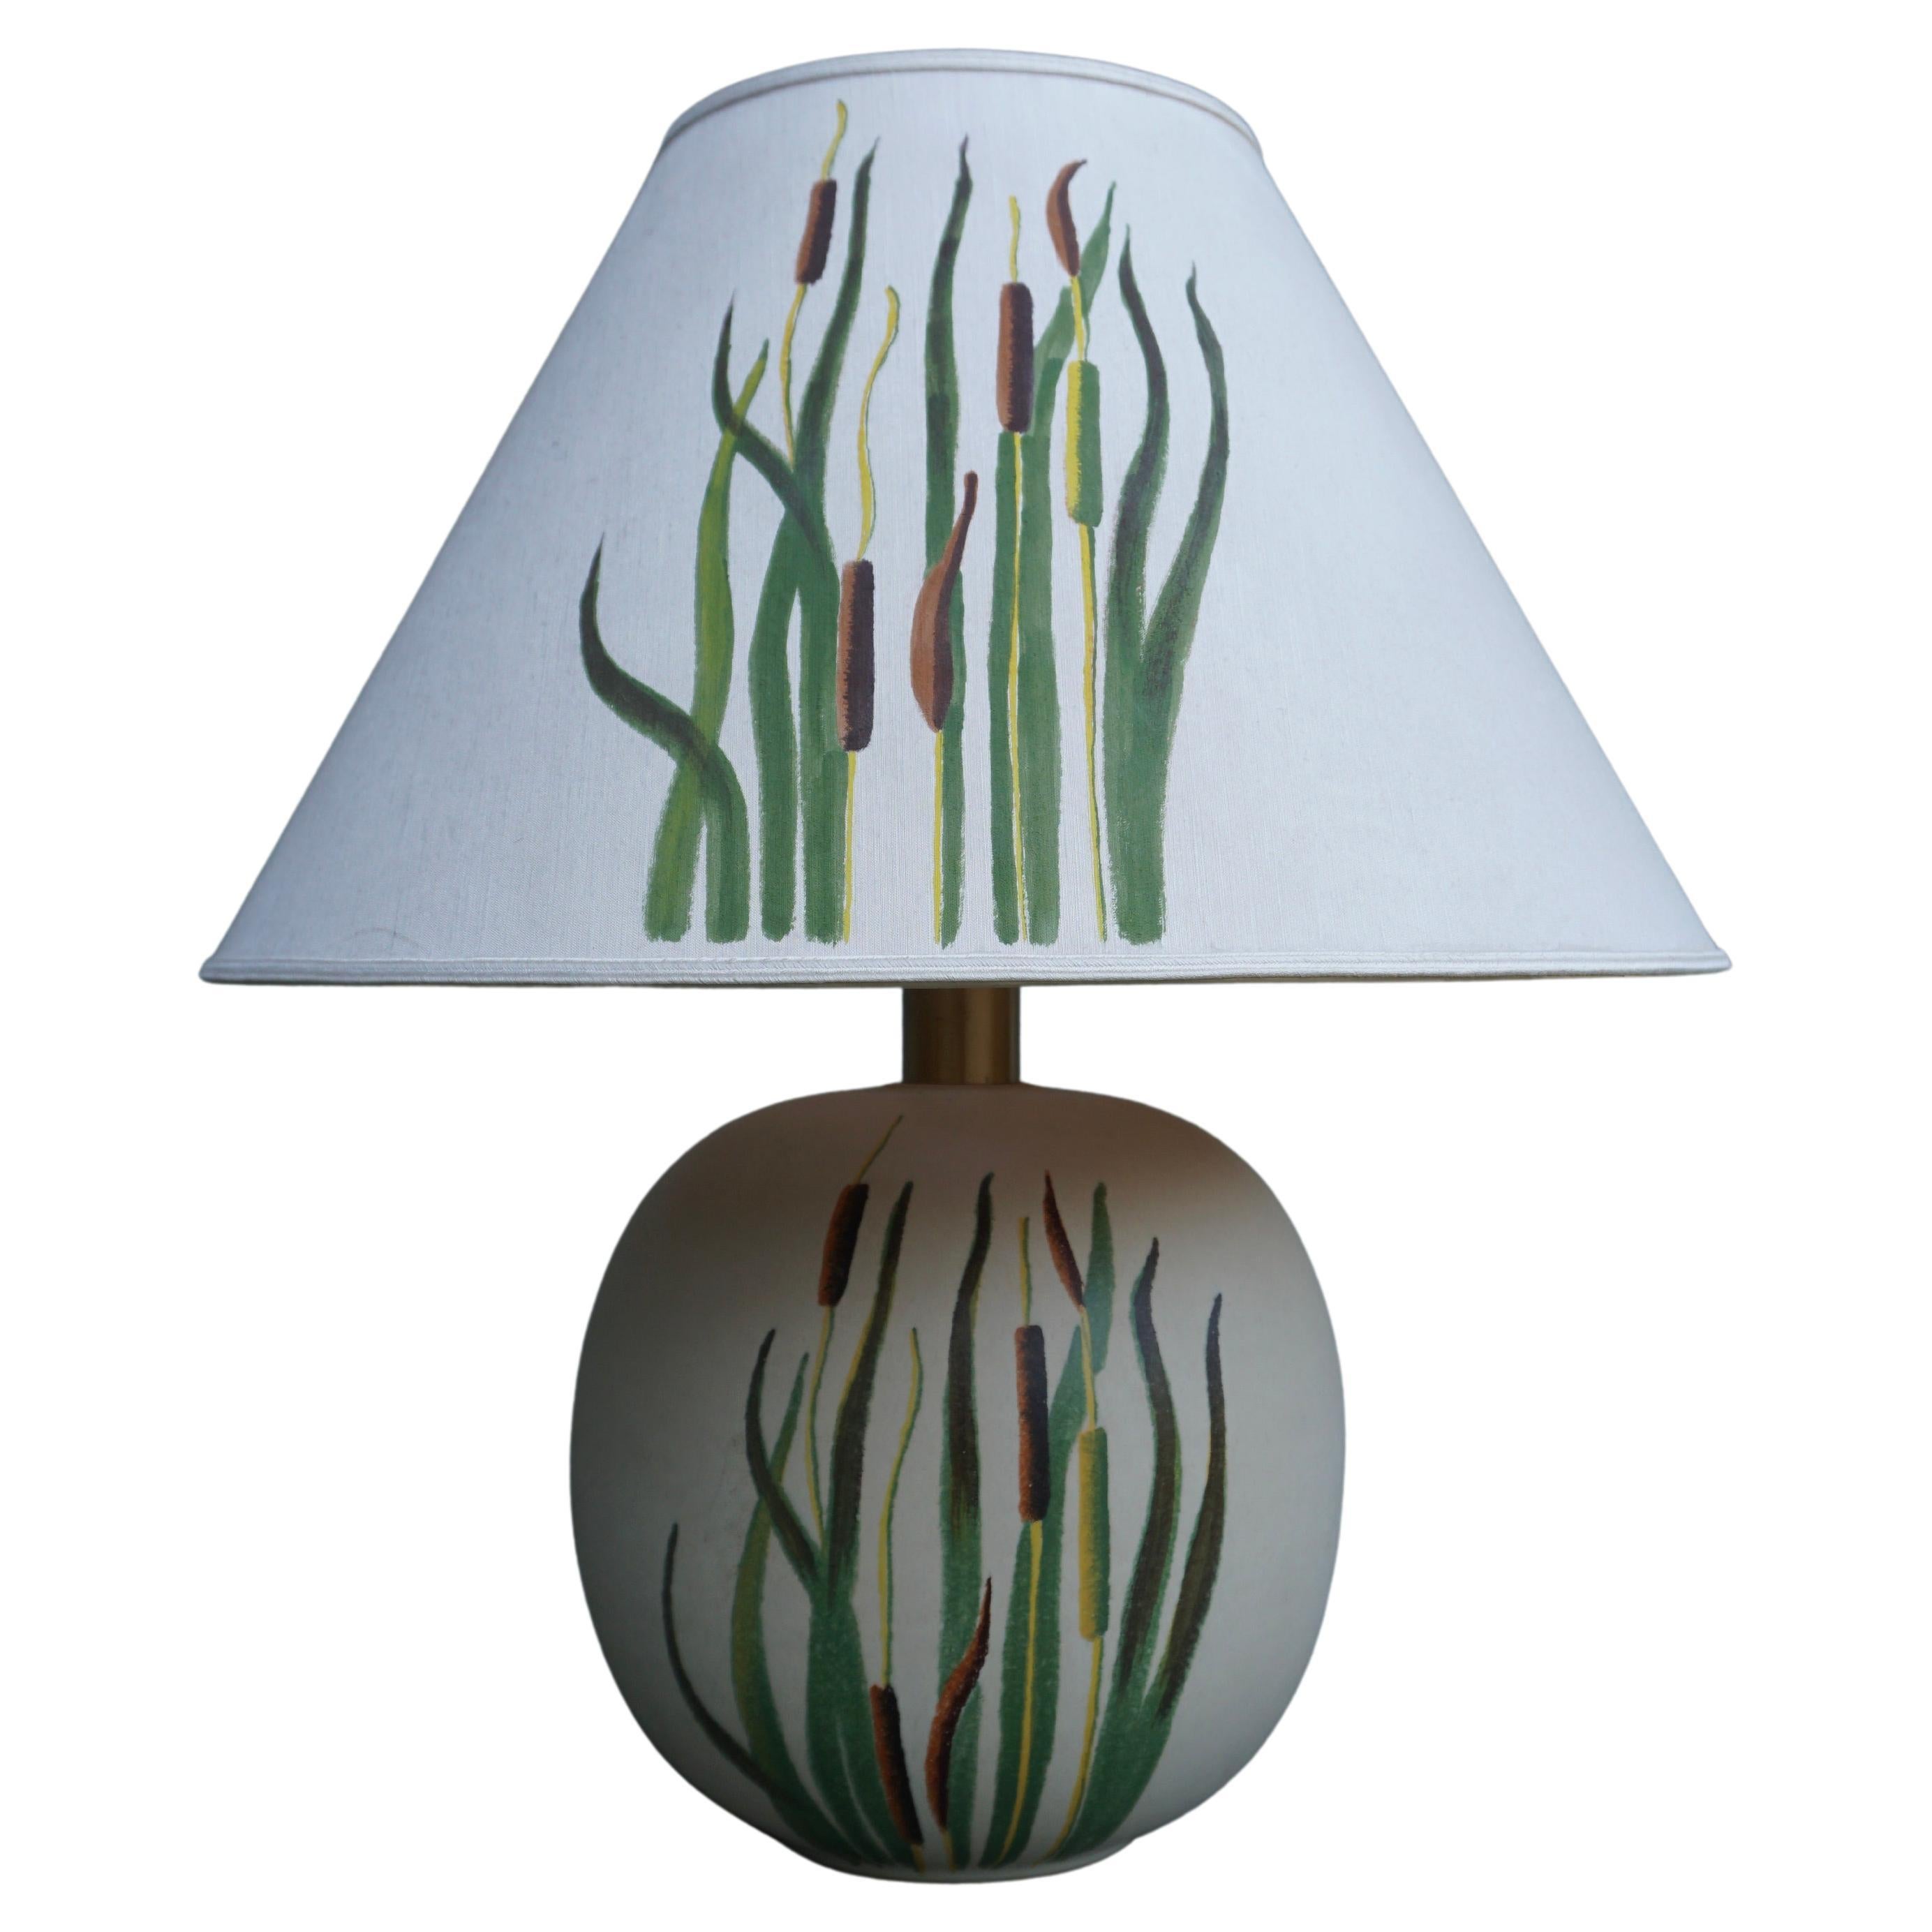 Ceramic Table Lamp with Botanical Representation of Cattails Grass For Sale